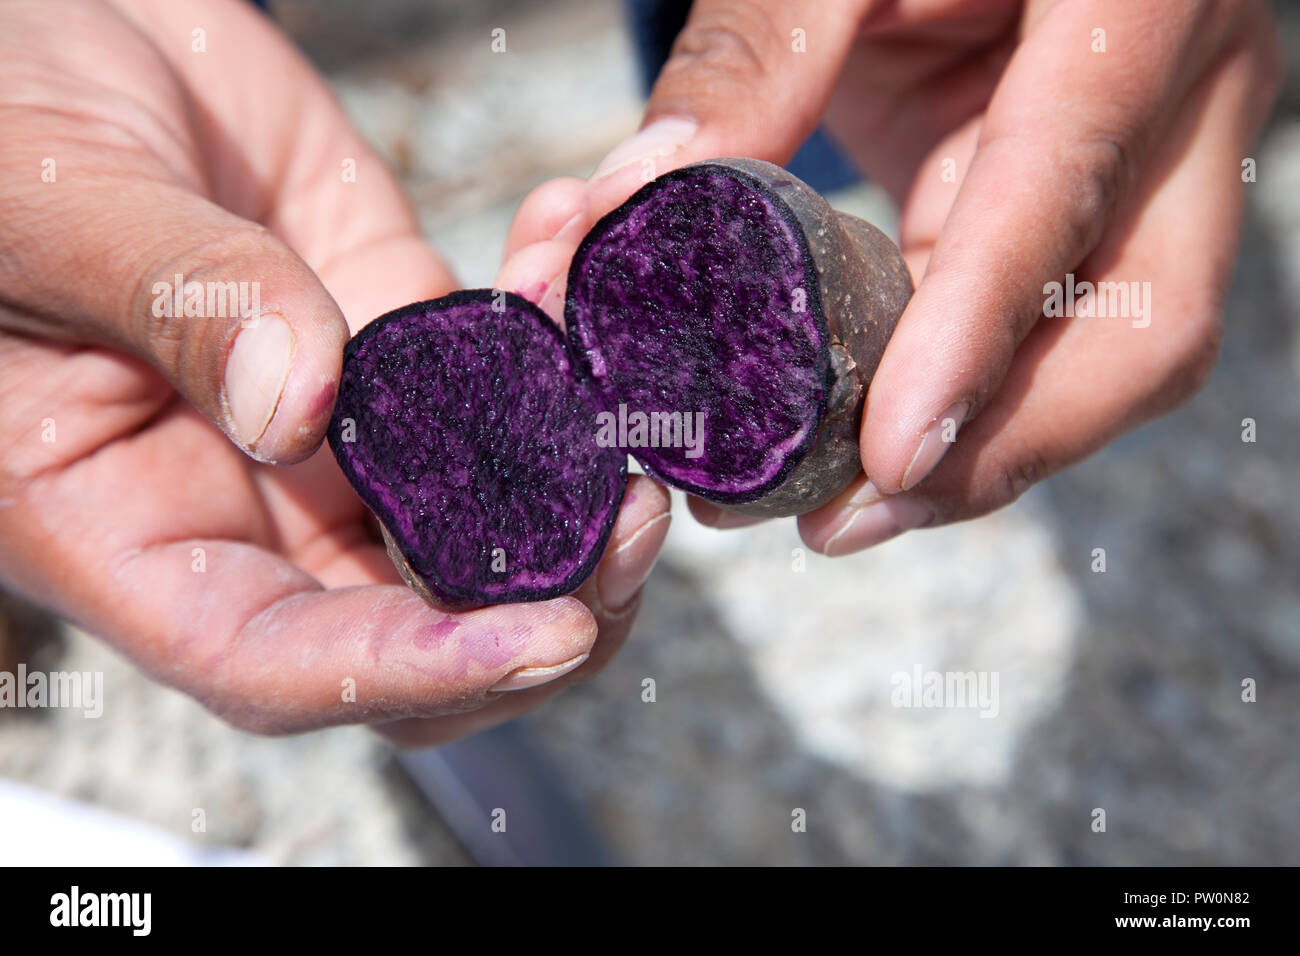 Purple potatoes grown by the Choqque family of Huatata near Chinchero, Peru, who breed potatoes with high intensity of color. Stock Photo